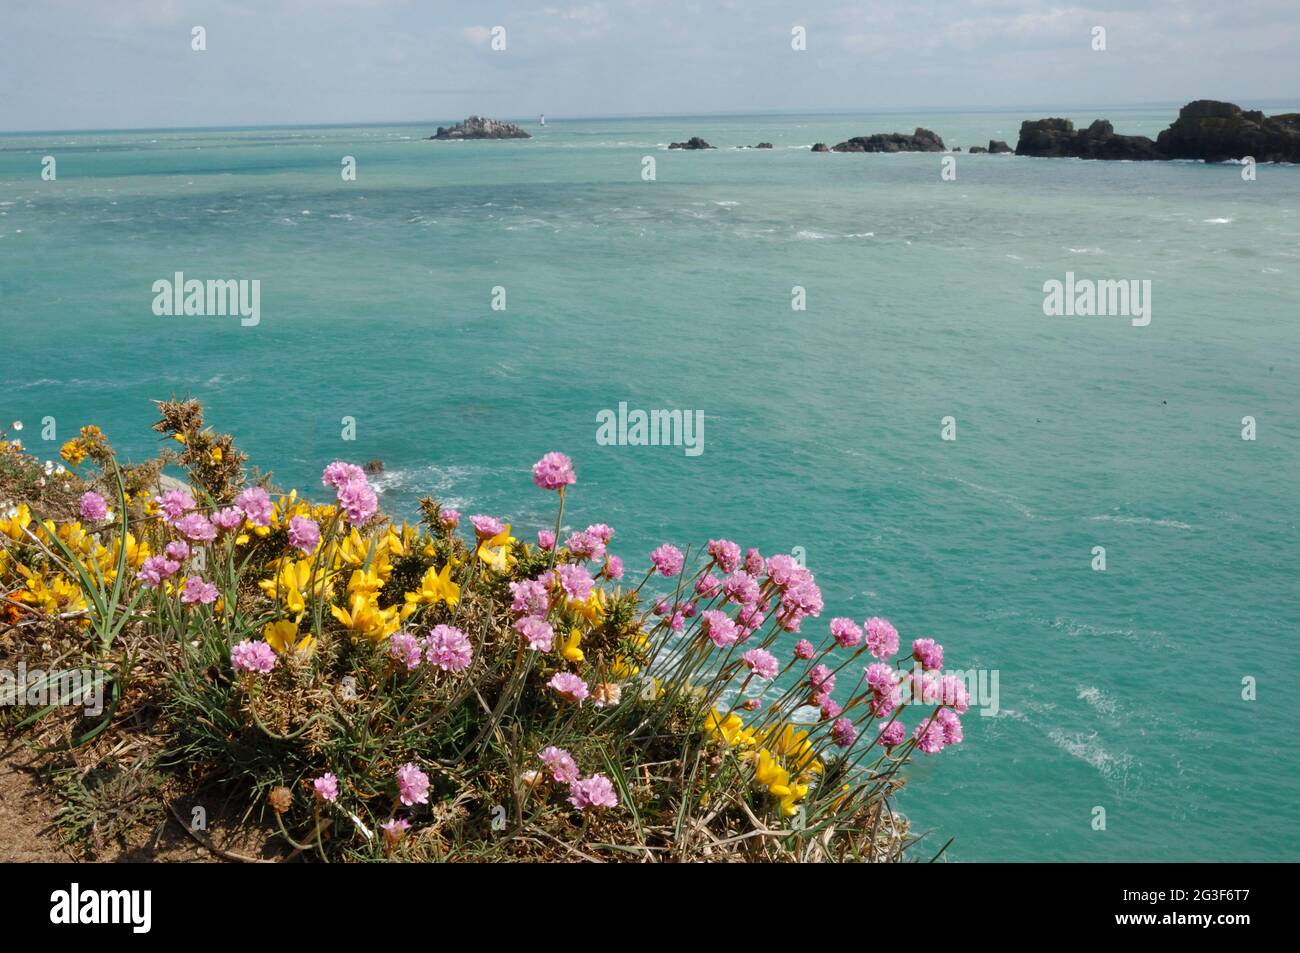 FRANCE. ILE ET VILAINE (35) CANCALE COTE D'EMERAUDE POINTE DU GROUIN ARMERIES IN BLOOM (PICTURE NOT AVAILABLE FOR CALENDARS OR POSTCARDS IN FRANCE) Stock Photo